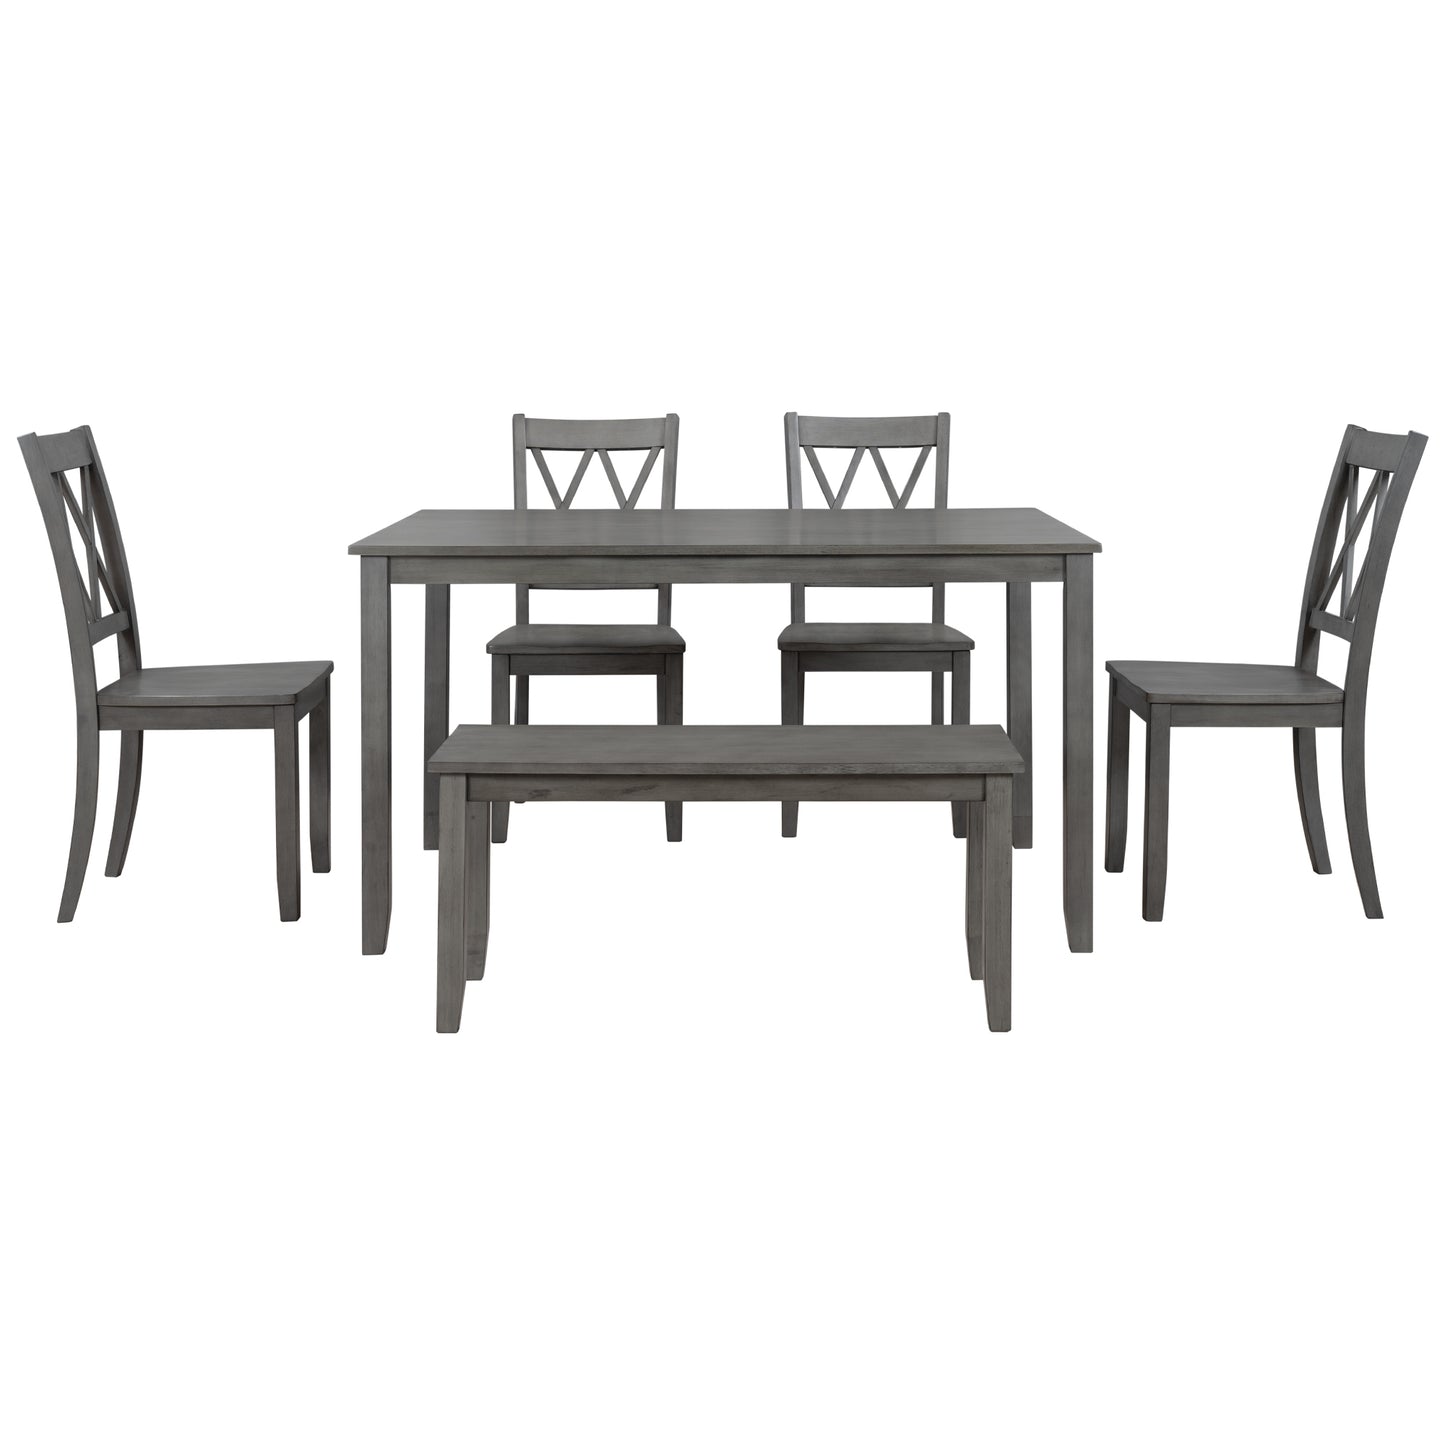 6-piece Wooden Kitchen Table set, Farmhouse Rustic Dining Table set with Cross Back 4 Chairs and Bench, Antique Graywash